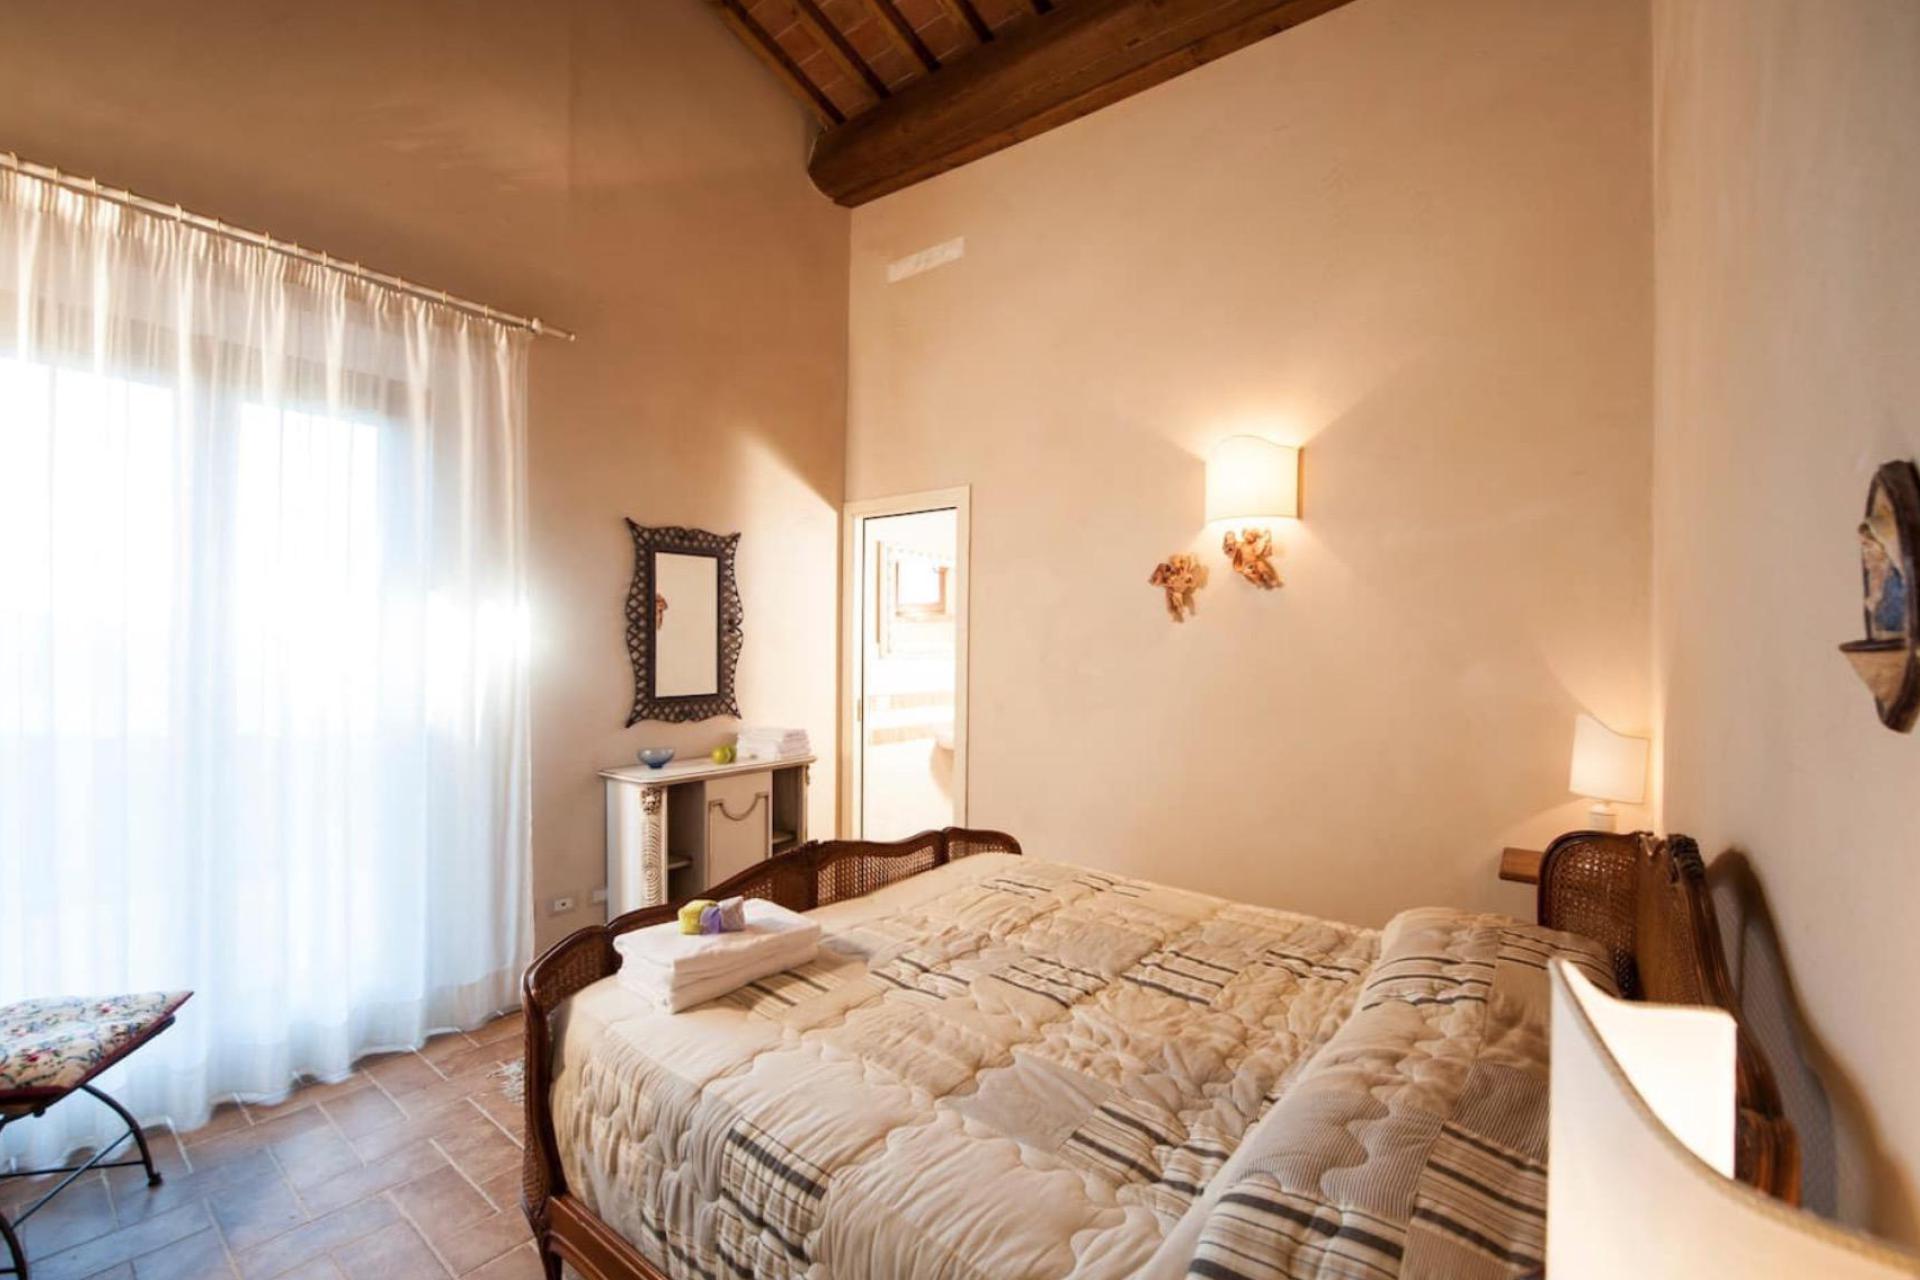 Agriturismo Tuscany Agriturismo Siena for peace, nature, luxury and comfort